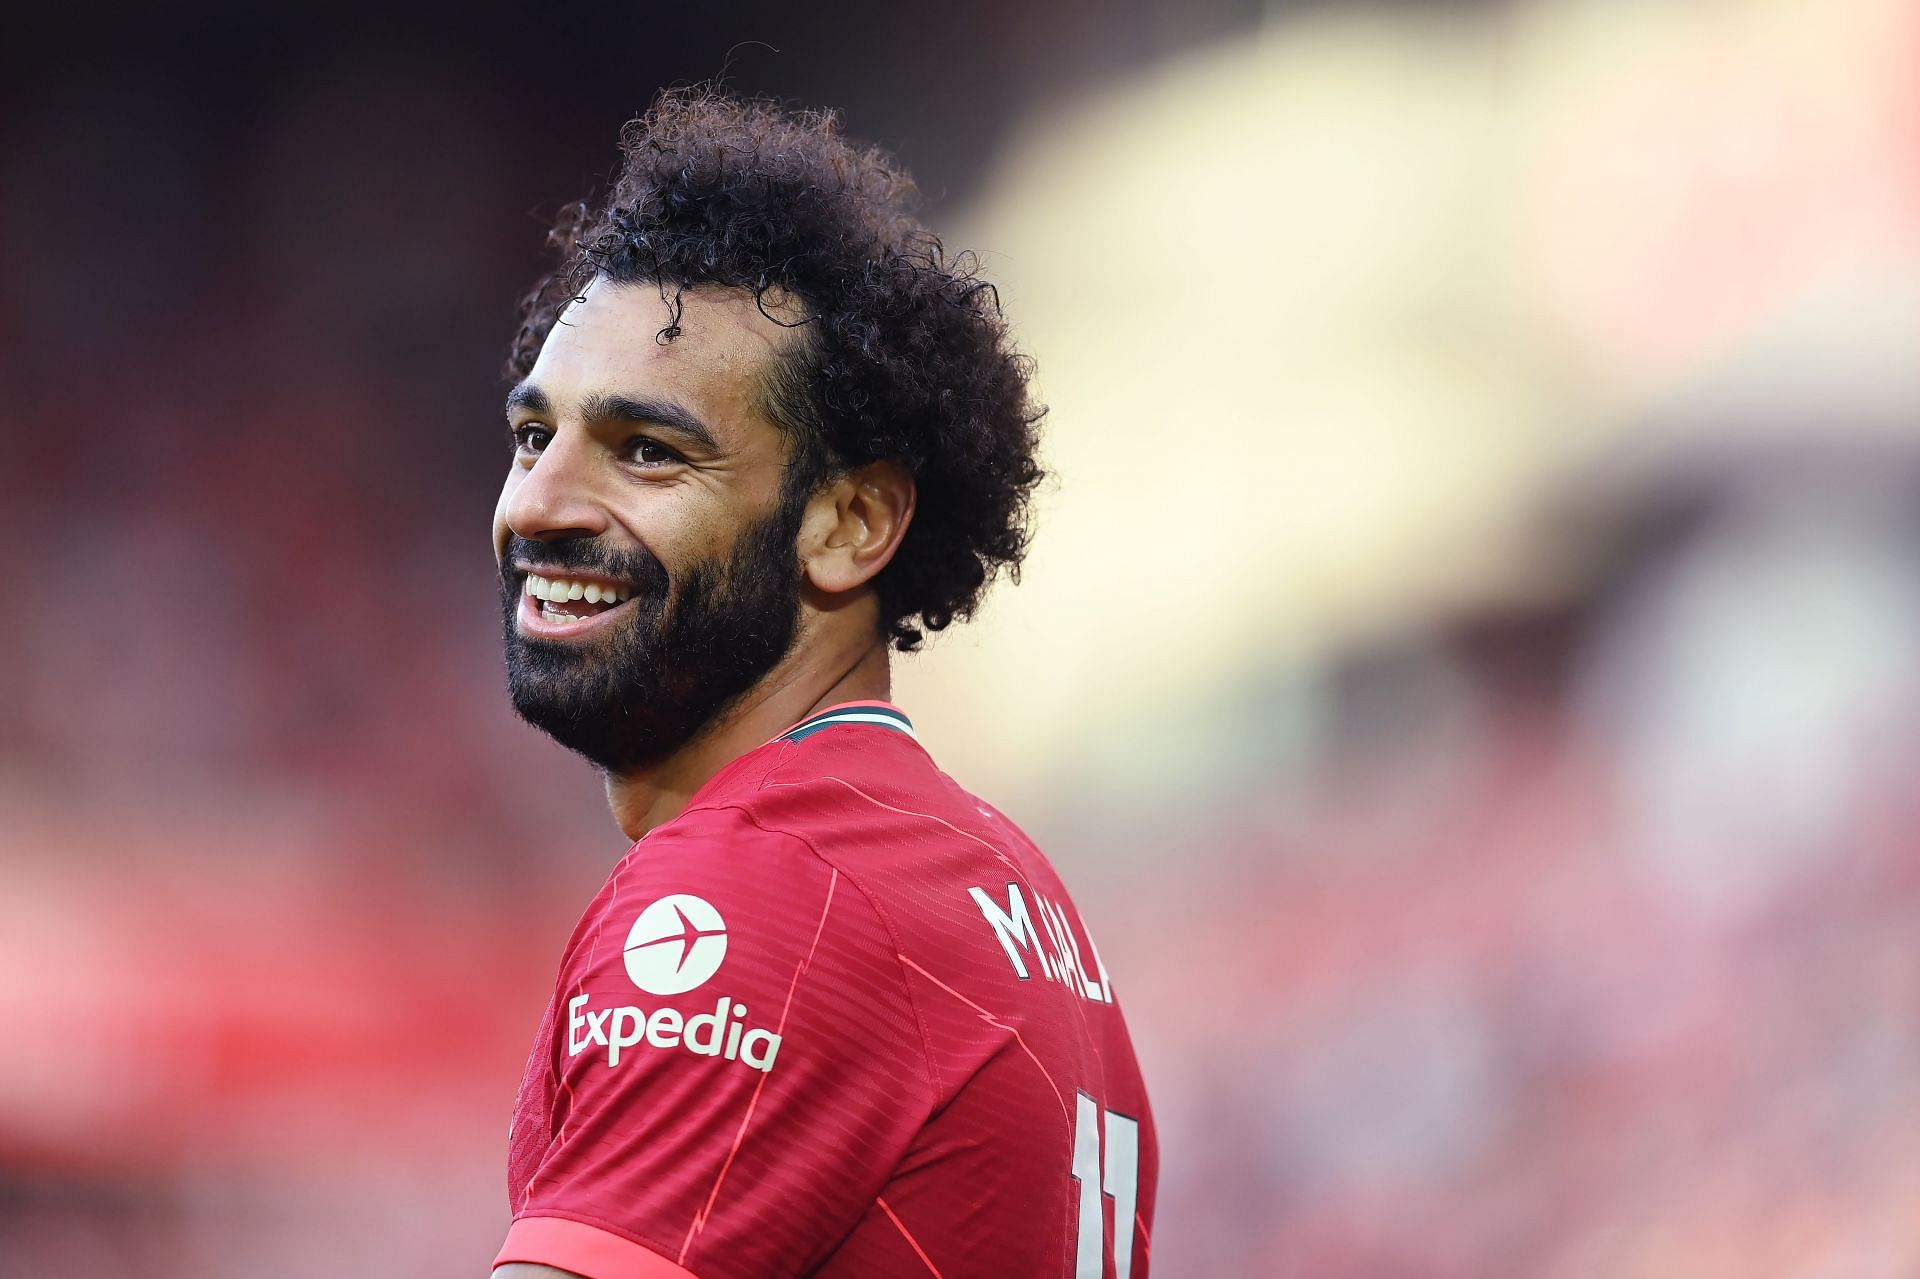 Mo Salah is among the most valuable players in the league